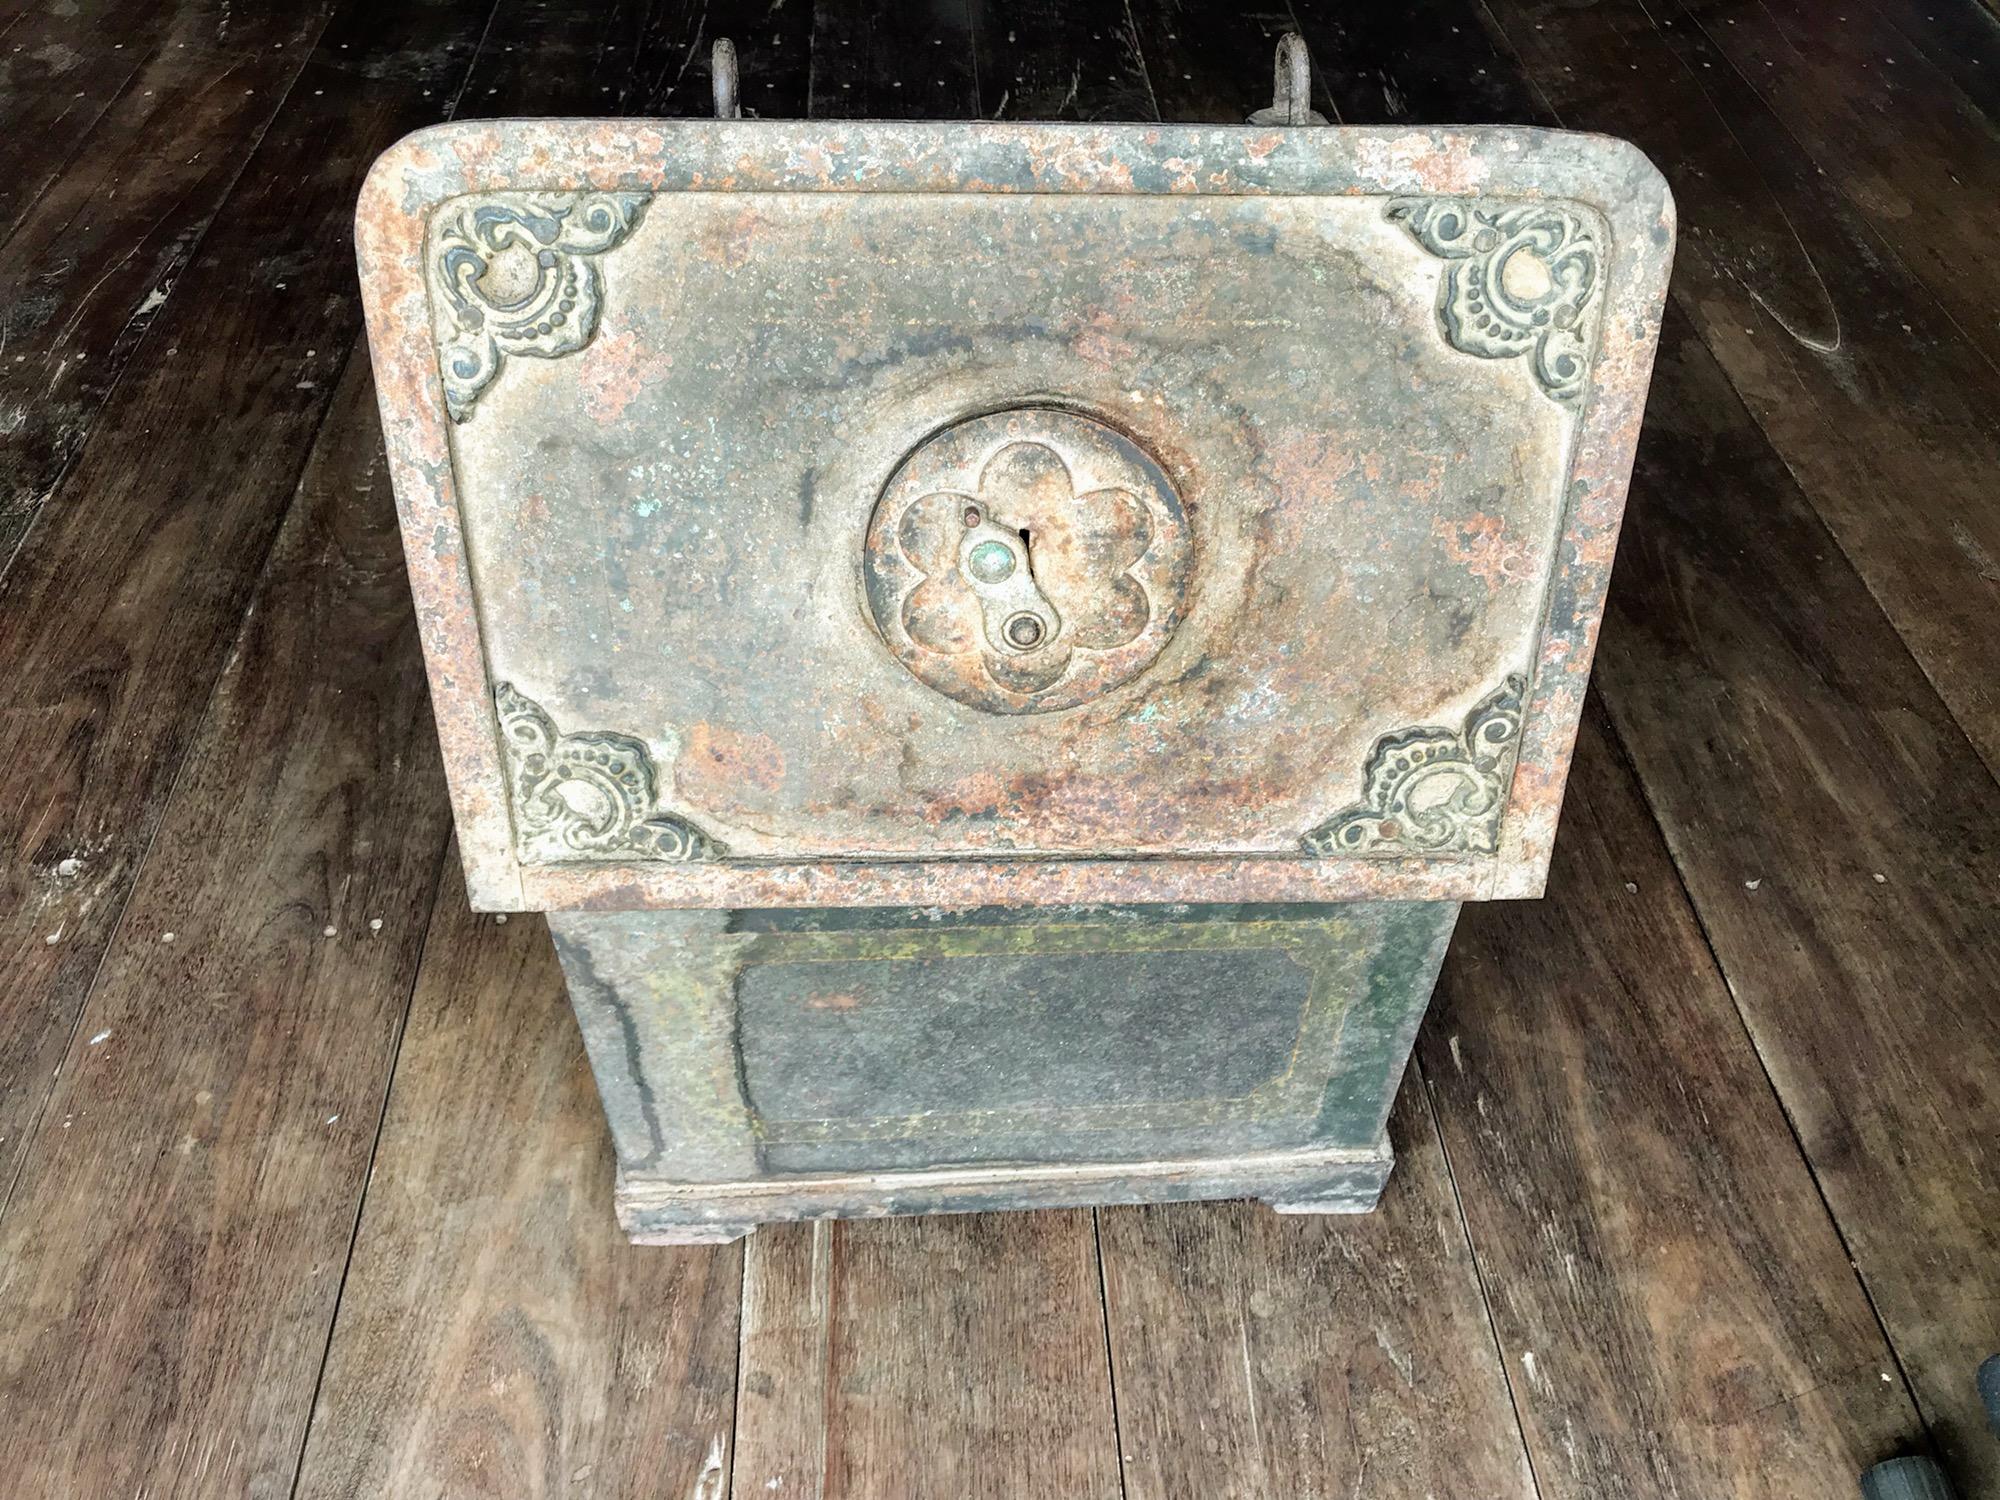 This fine forged iron decorative strong box belonged to the great grandfather of a relation of our managing director Tony in Thailand and was used by him in his trading company as he often travelled throughout the far east for his business, it would